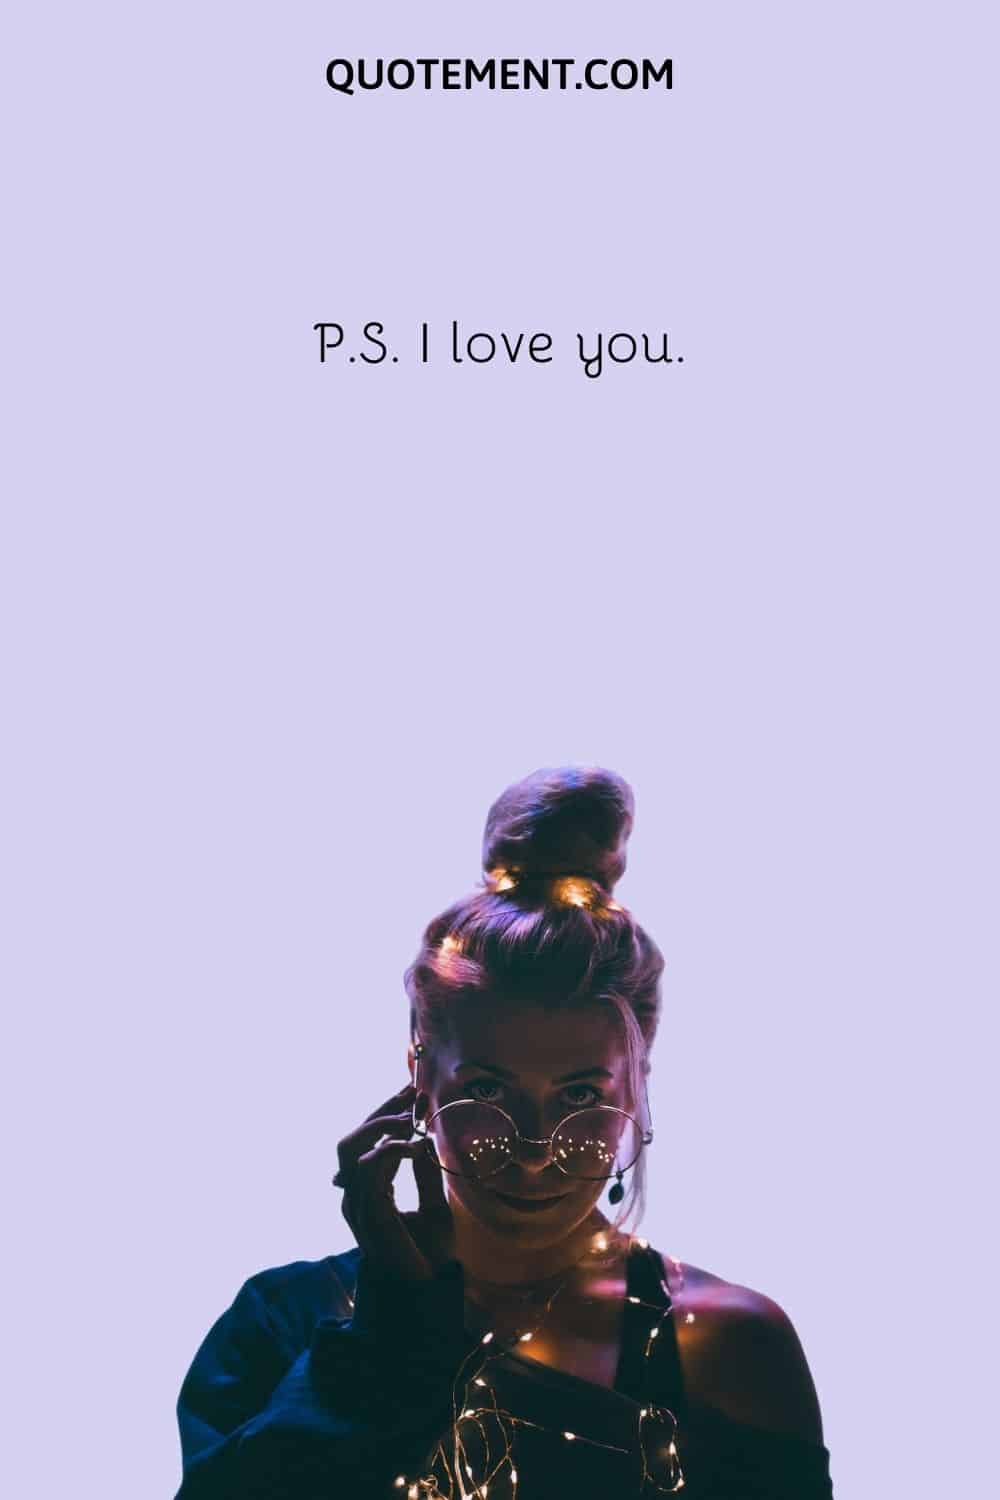 P.S. I love you